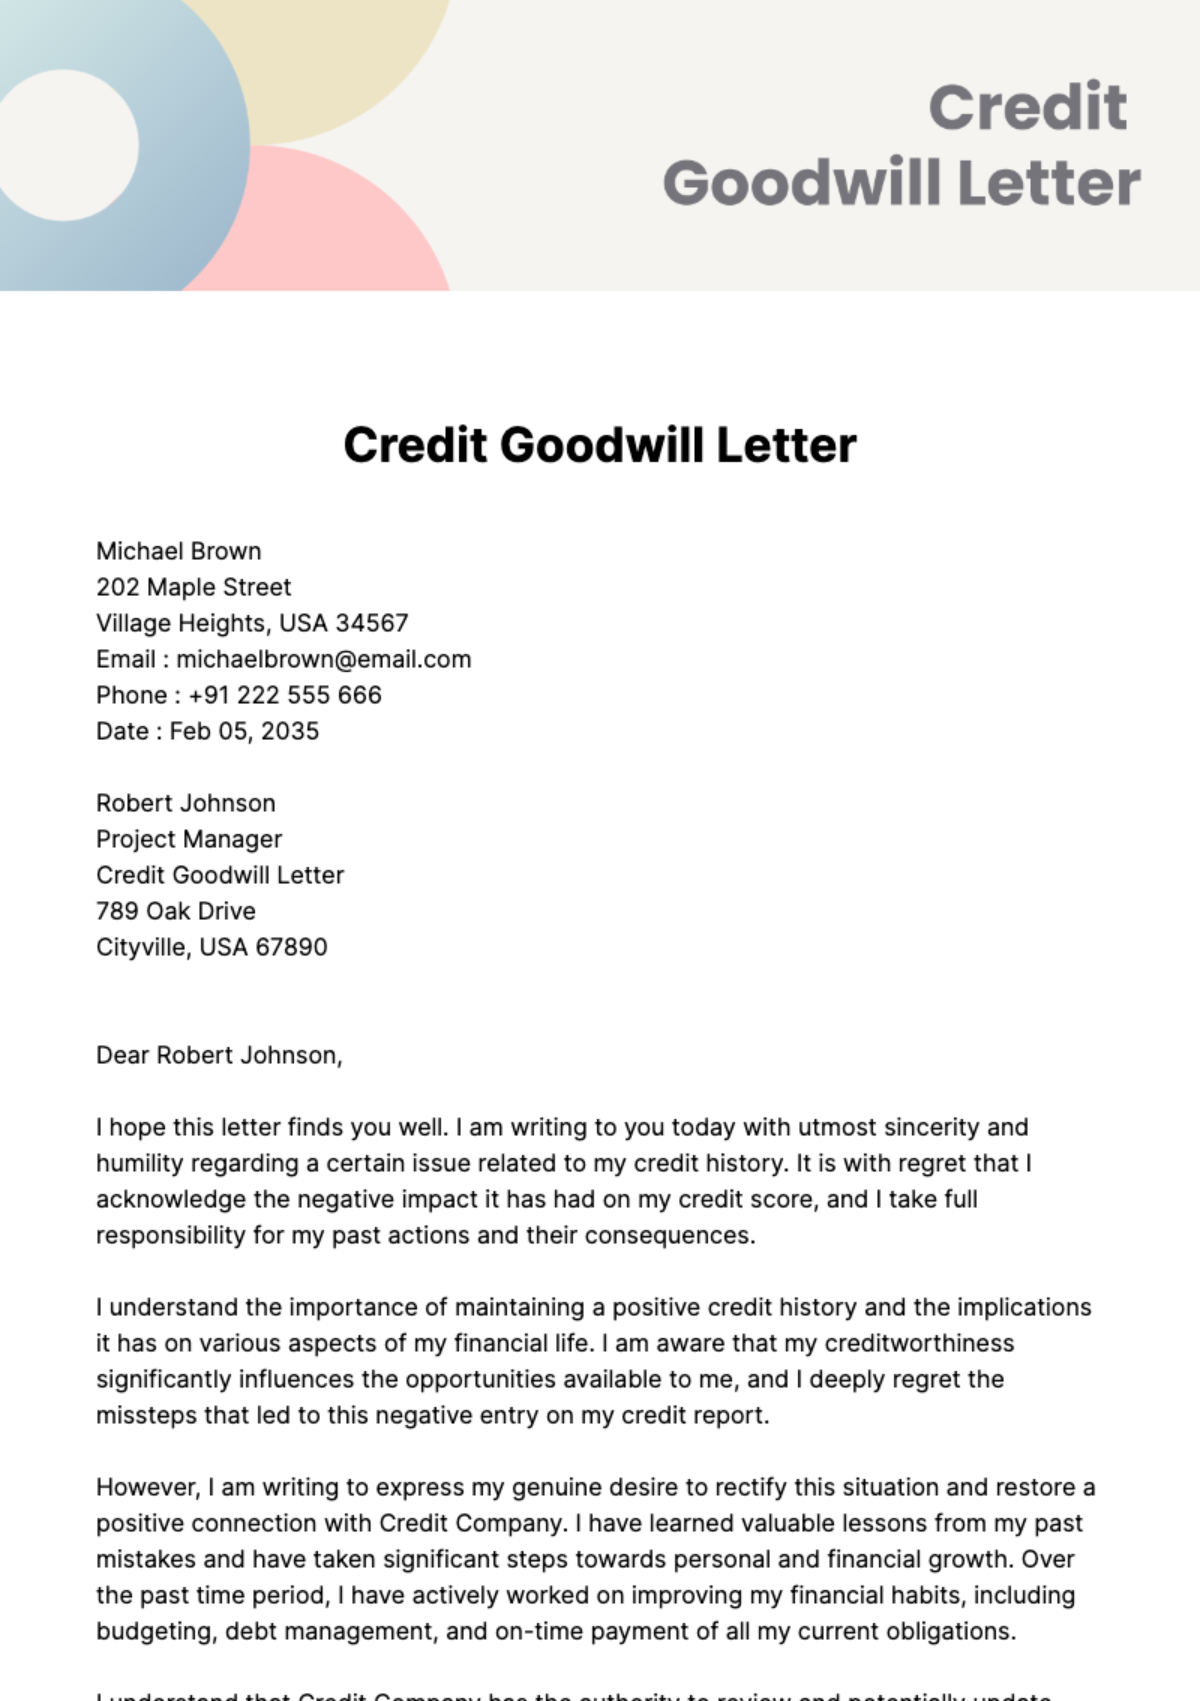 Free Credit Goodwill Letter Template